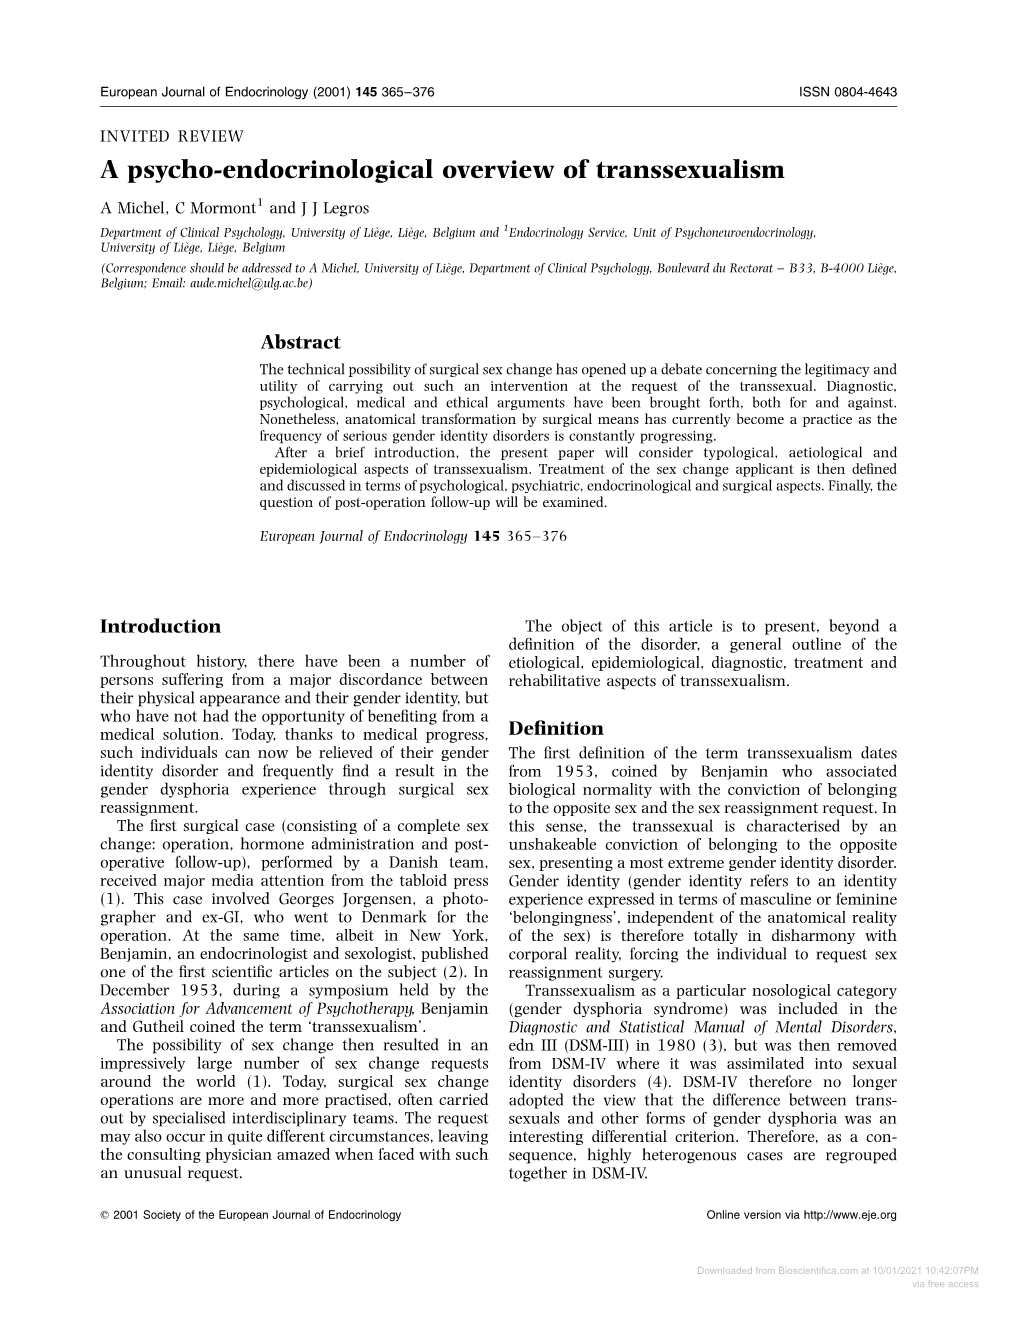 A Psycho-Endocrinological Overview of Transsexualism